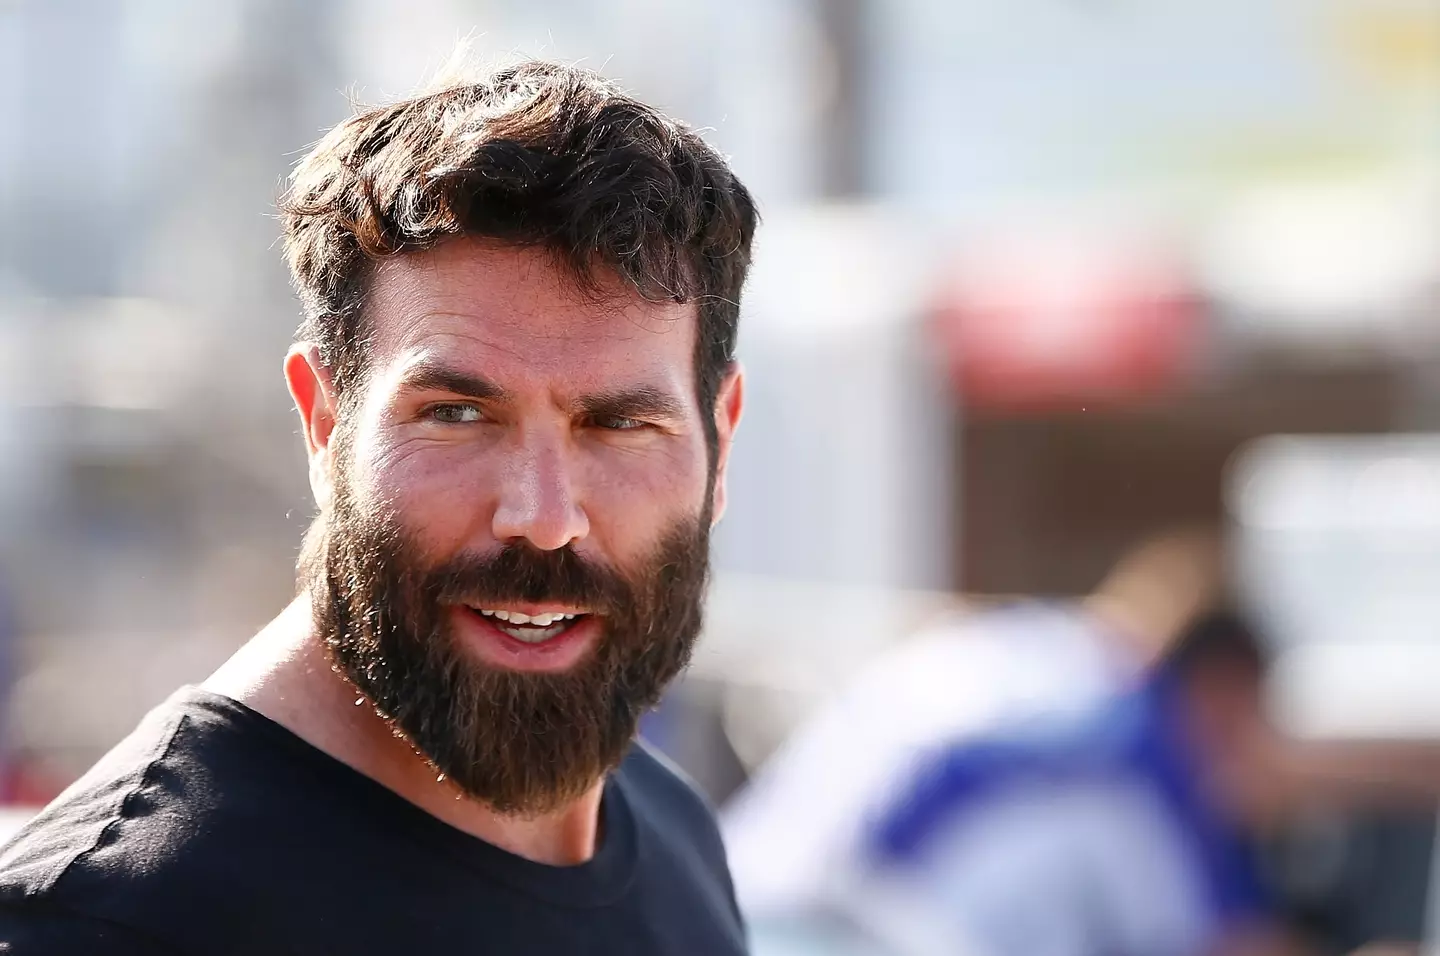 Bilzerian took cocaine and viagra in the days leading up to his heart attacks.